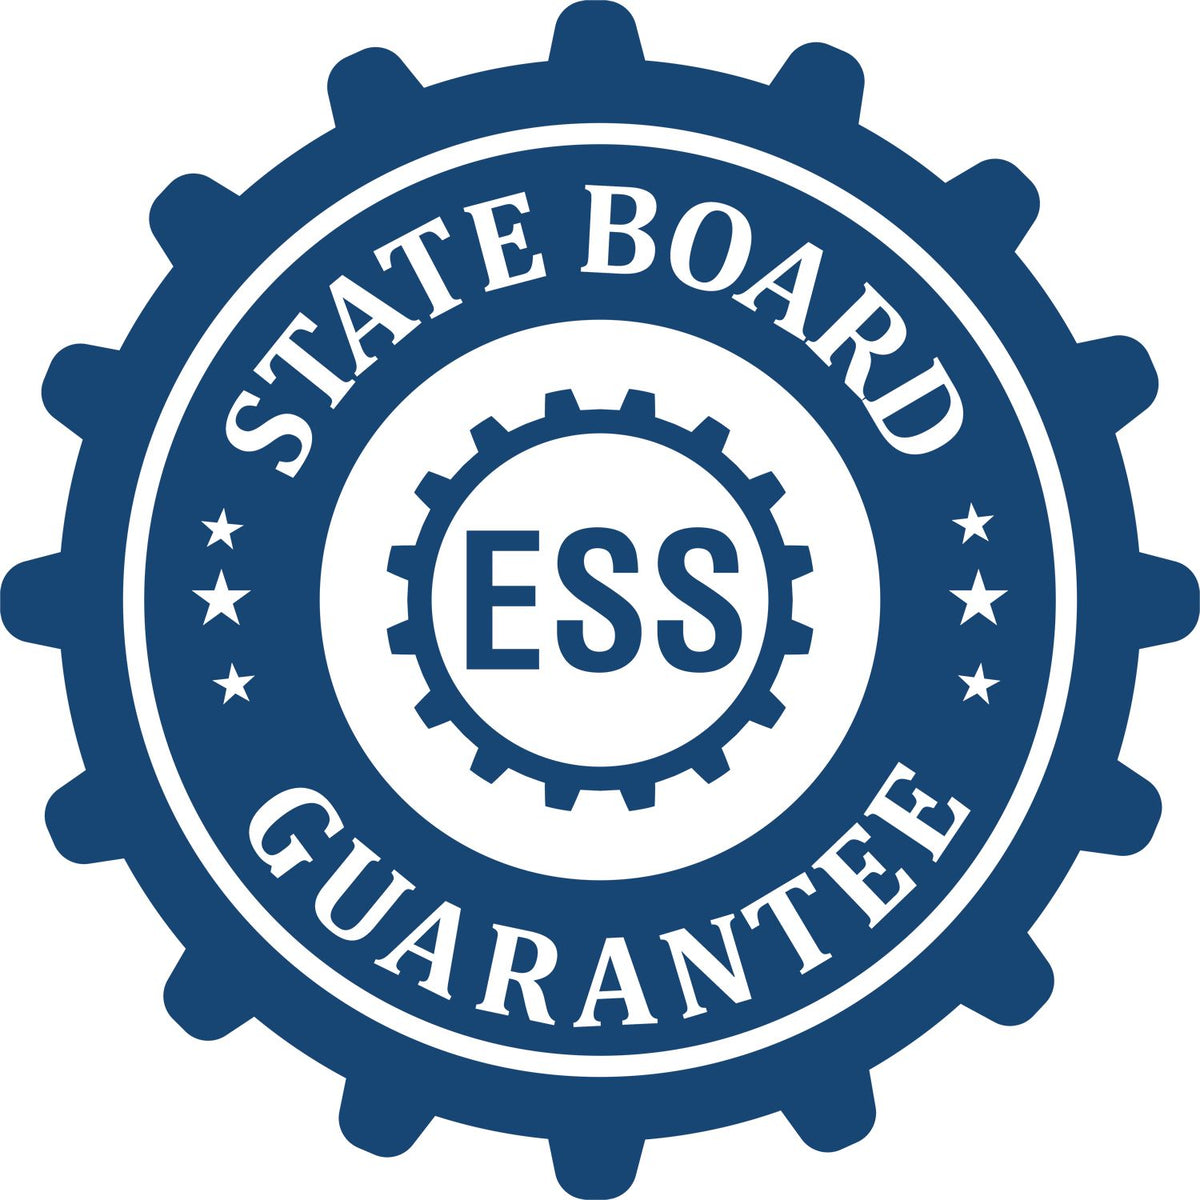 An emblem in a gear shape illustrating a state board guarantee for the Gift Idaho Engineer Seal